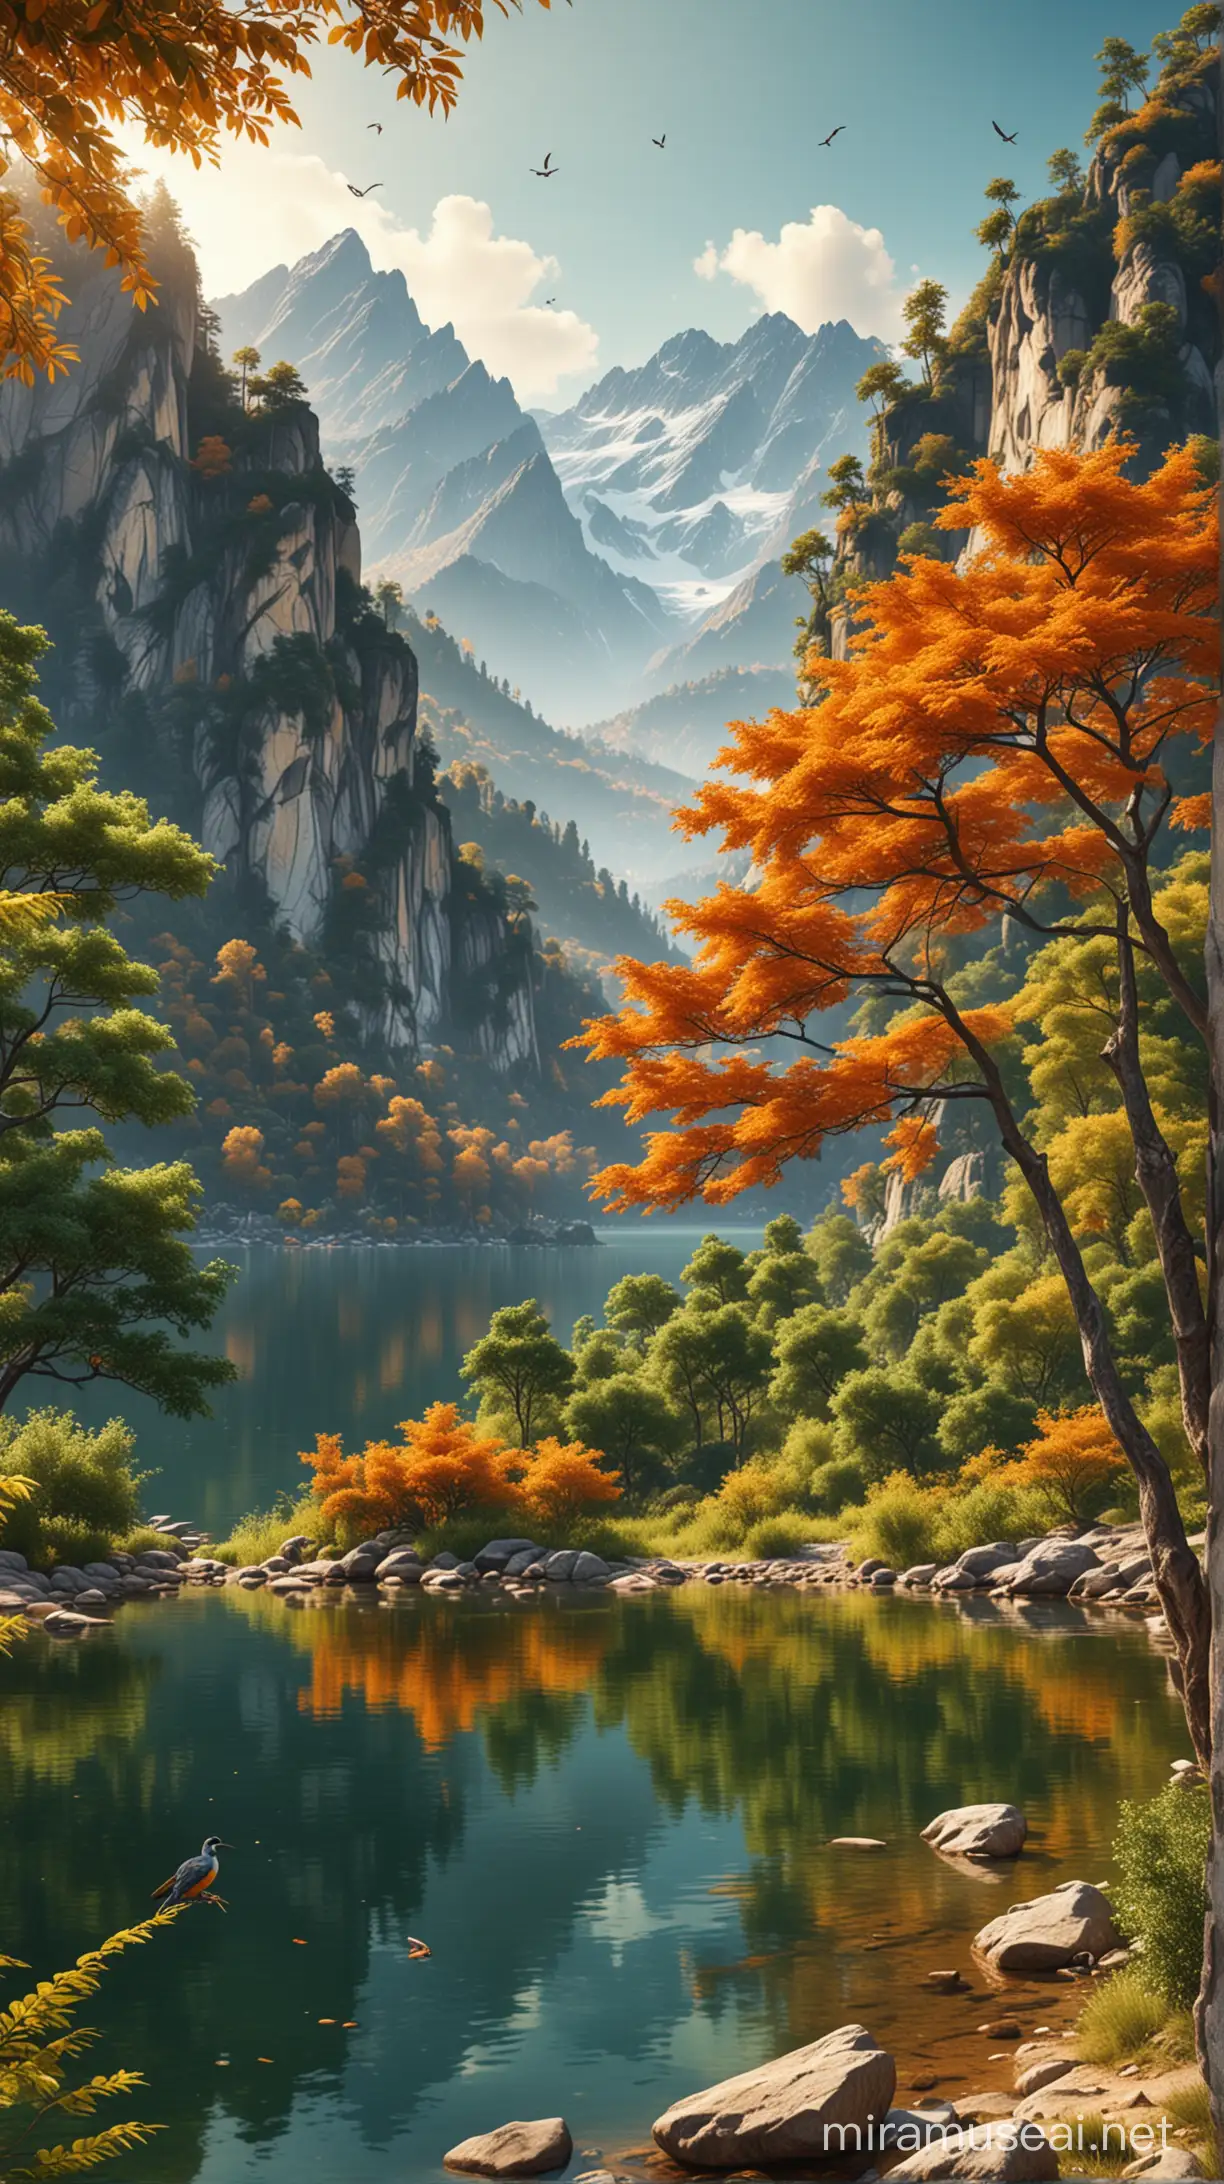 Scenic Landscape Majestic Mountains and Verdant Forest by the Lakeside